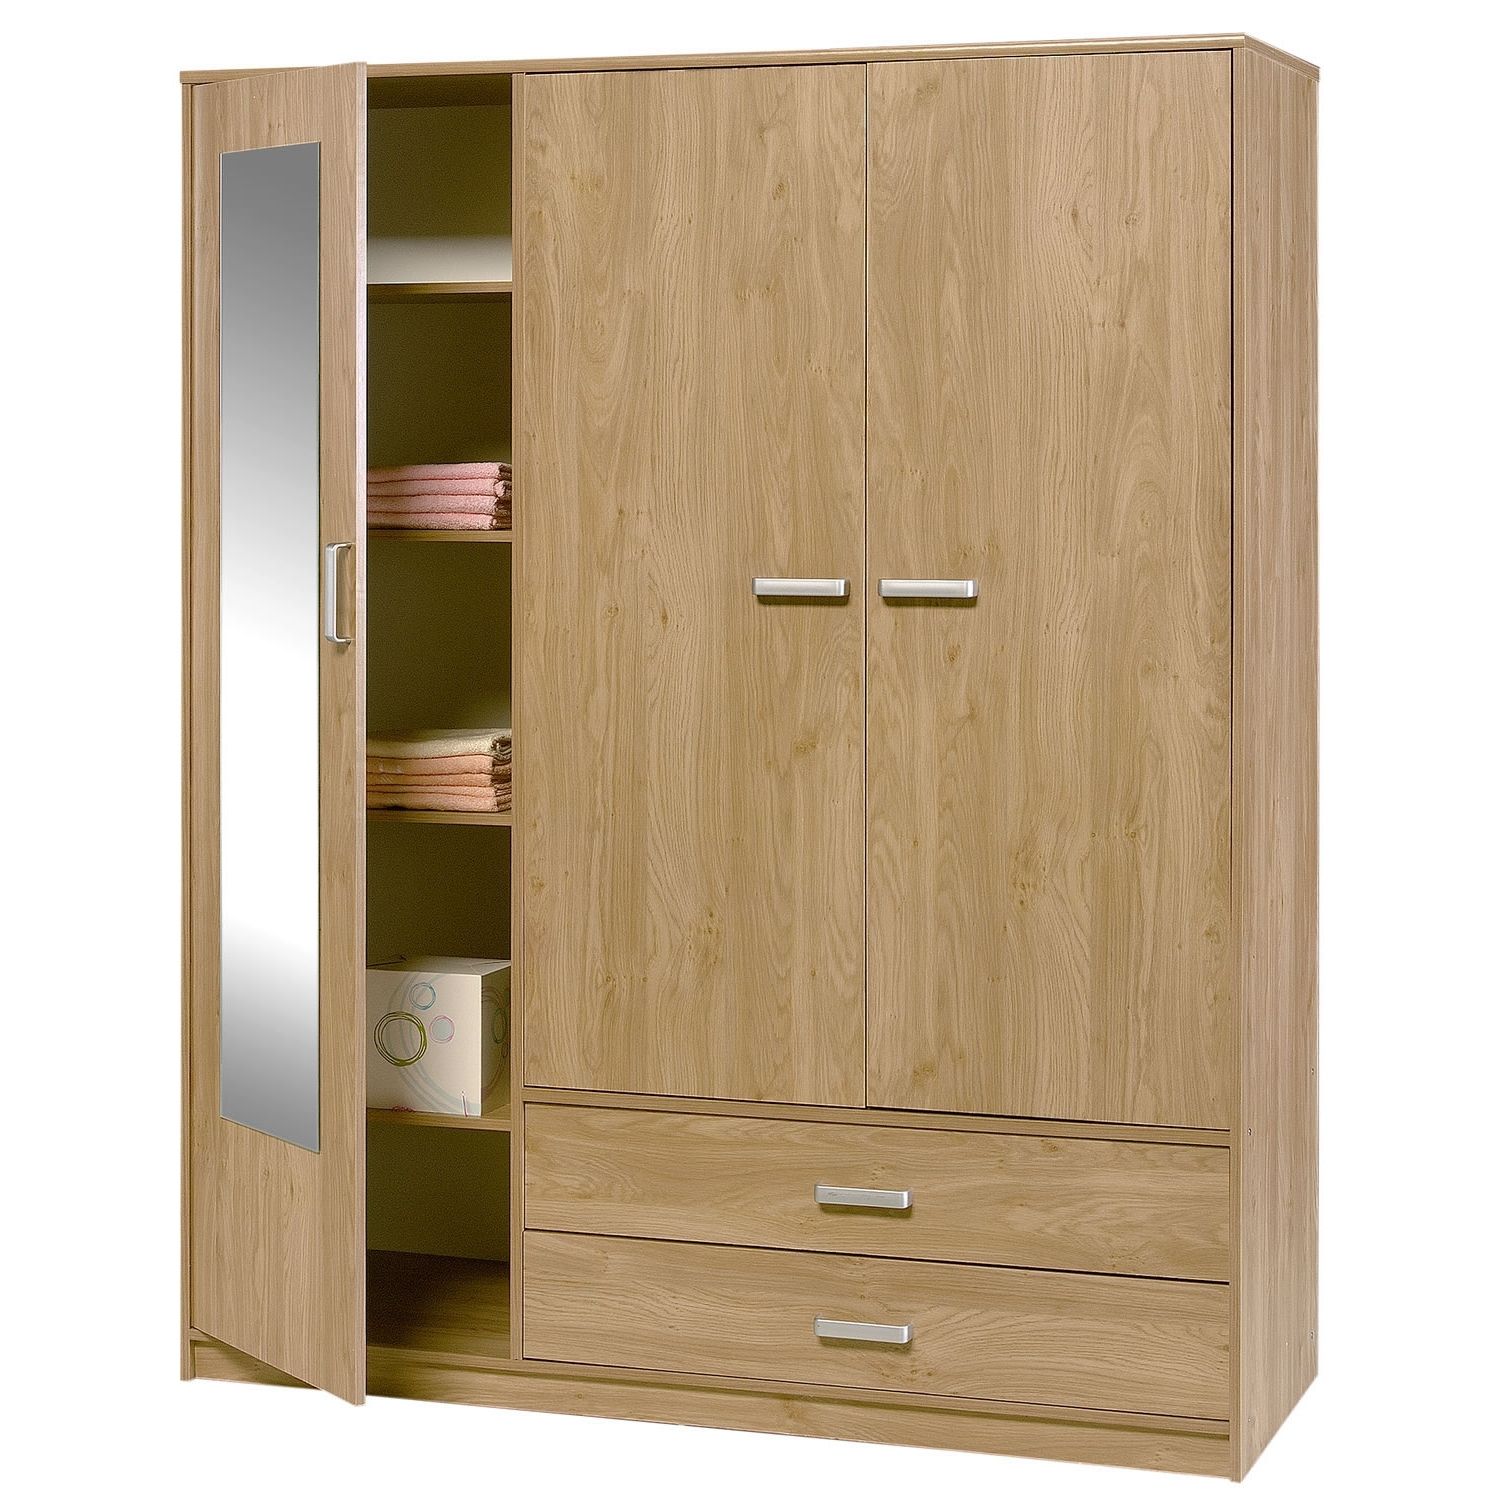 Door With Inside Trendy Oak Wardrobes With Drawers And Shelves (View 6 of 15)